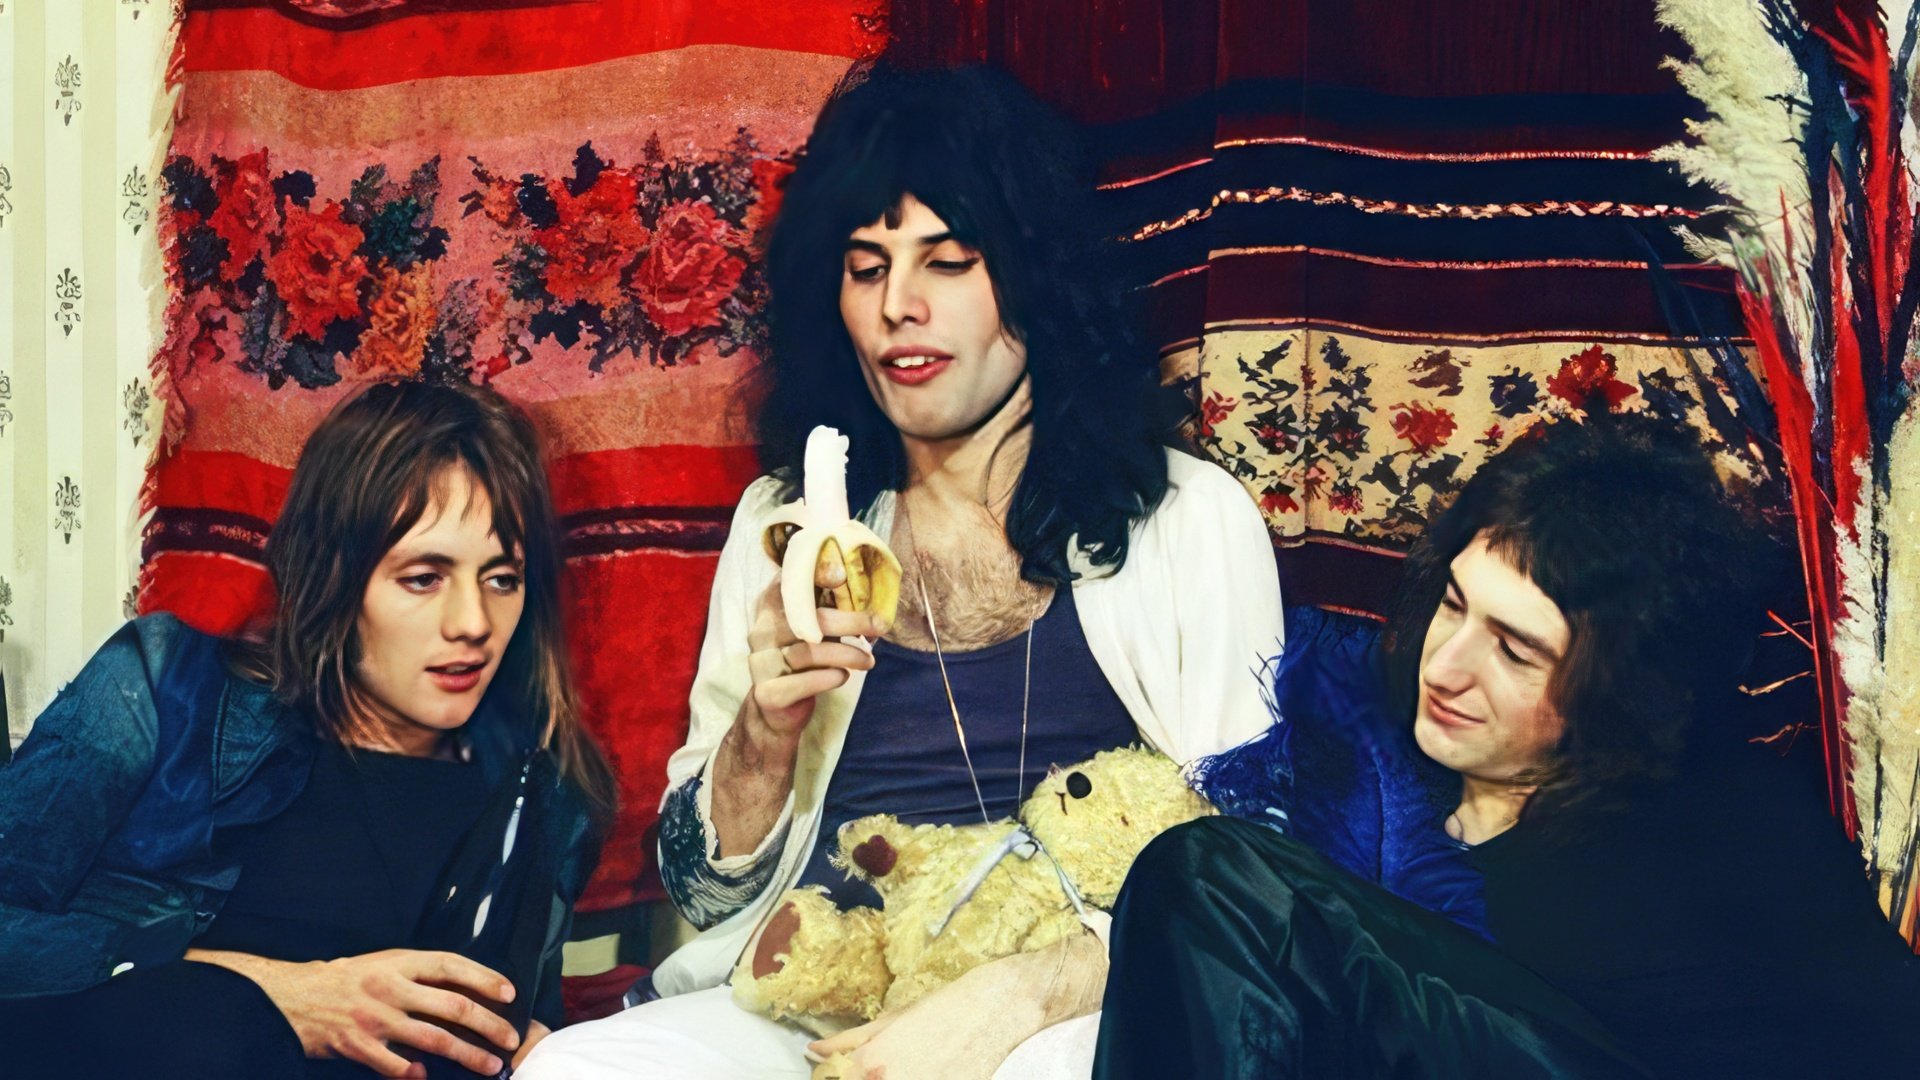 Queen photoshoot at Freddie Mercury's apartment, early 70s